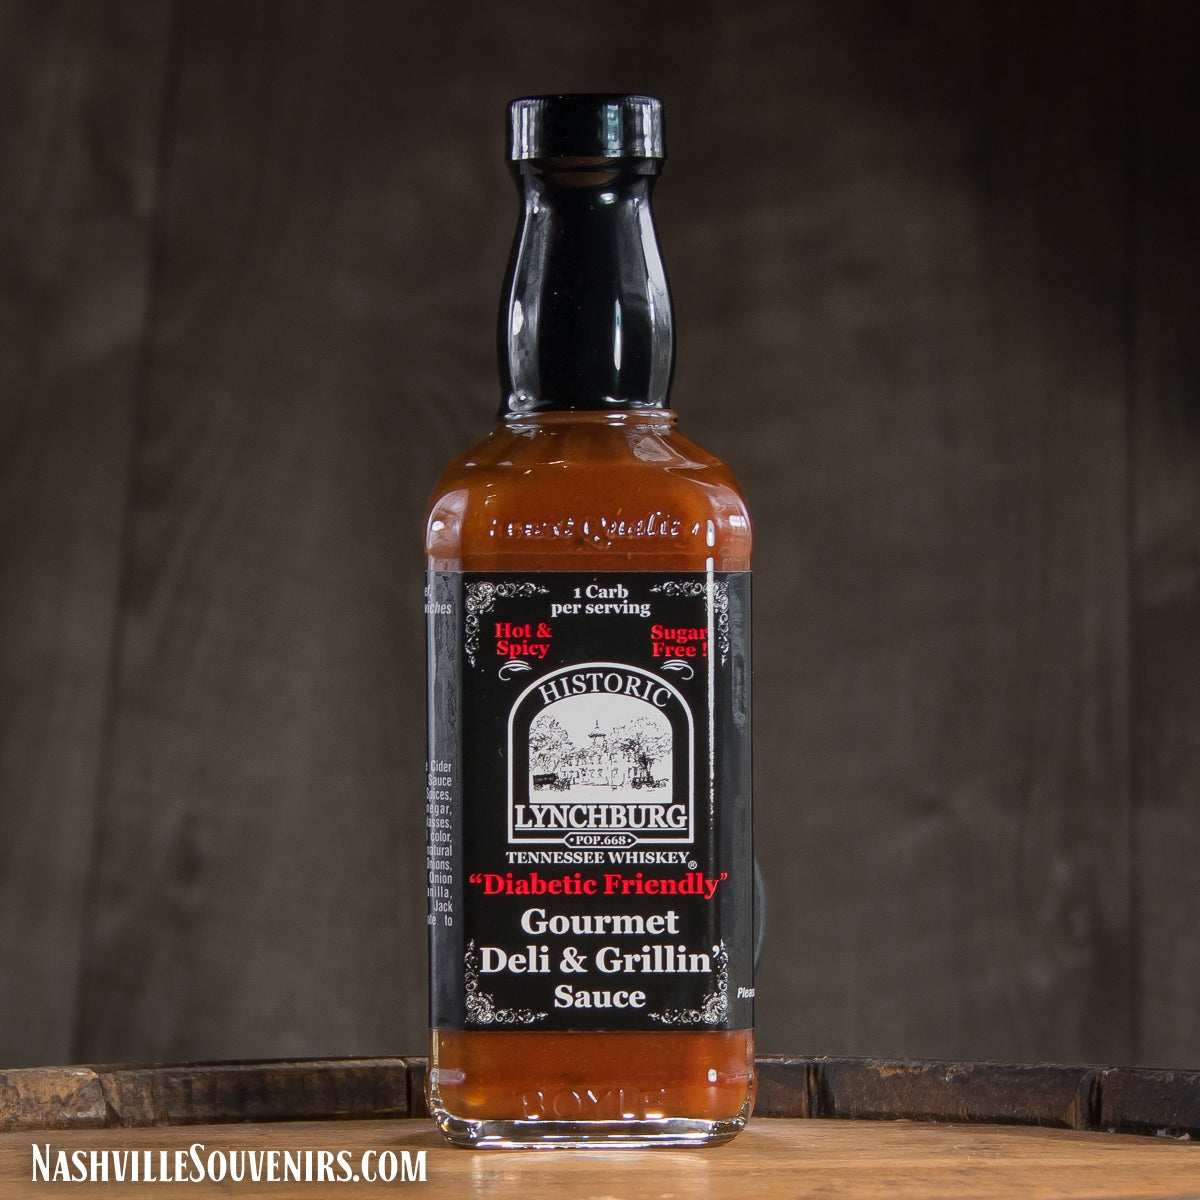 Buy Historic Lynchburg Diabetic Deli and Grillin' hot sauce with real Jack Daniels Tennessee Whiskey.  FREE SHIPPING on all US orders over $75!